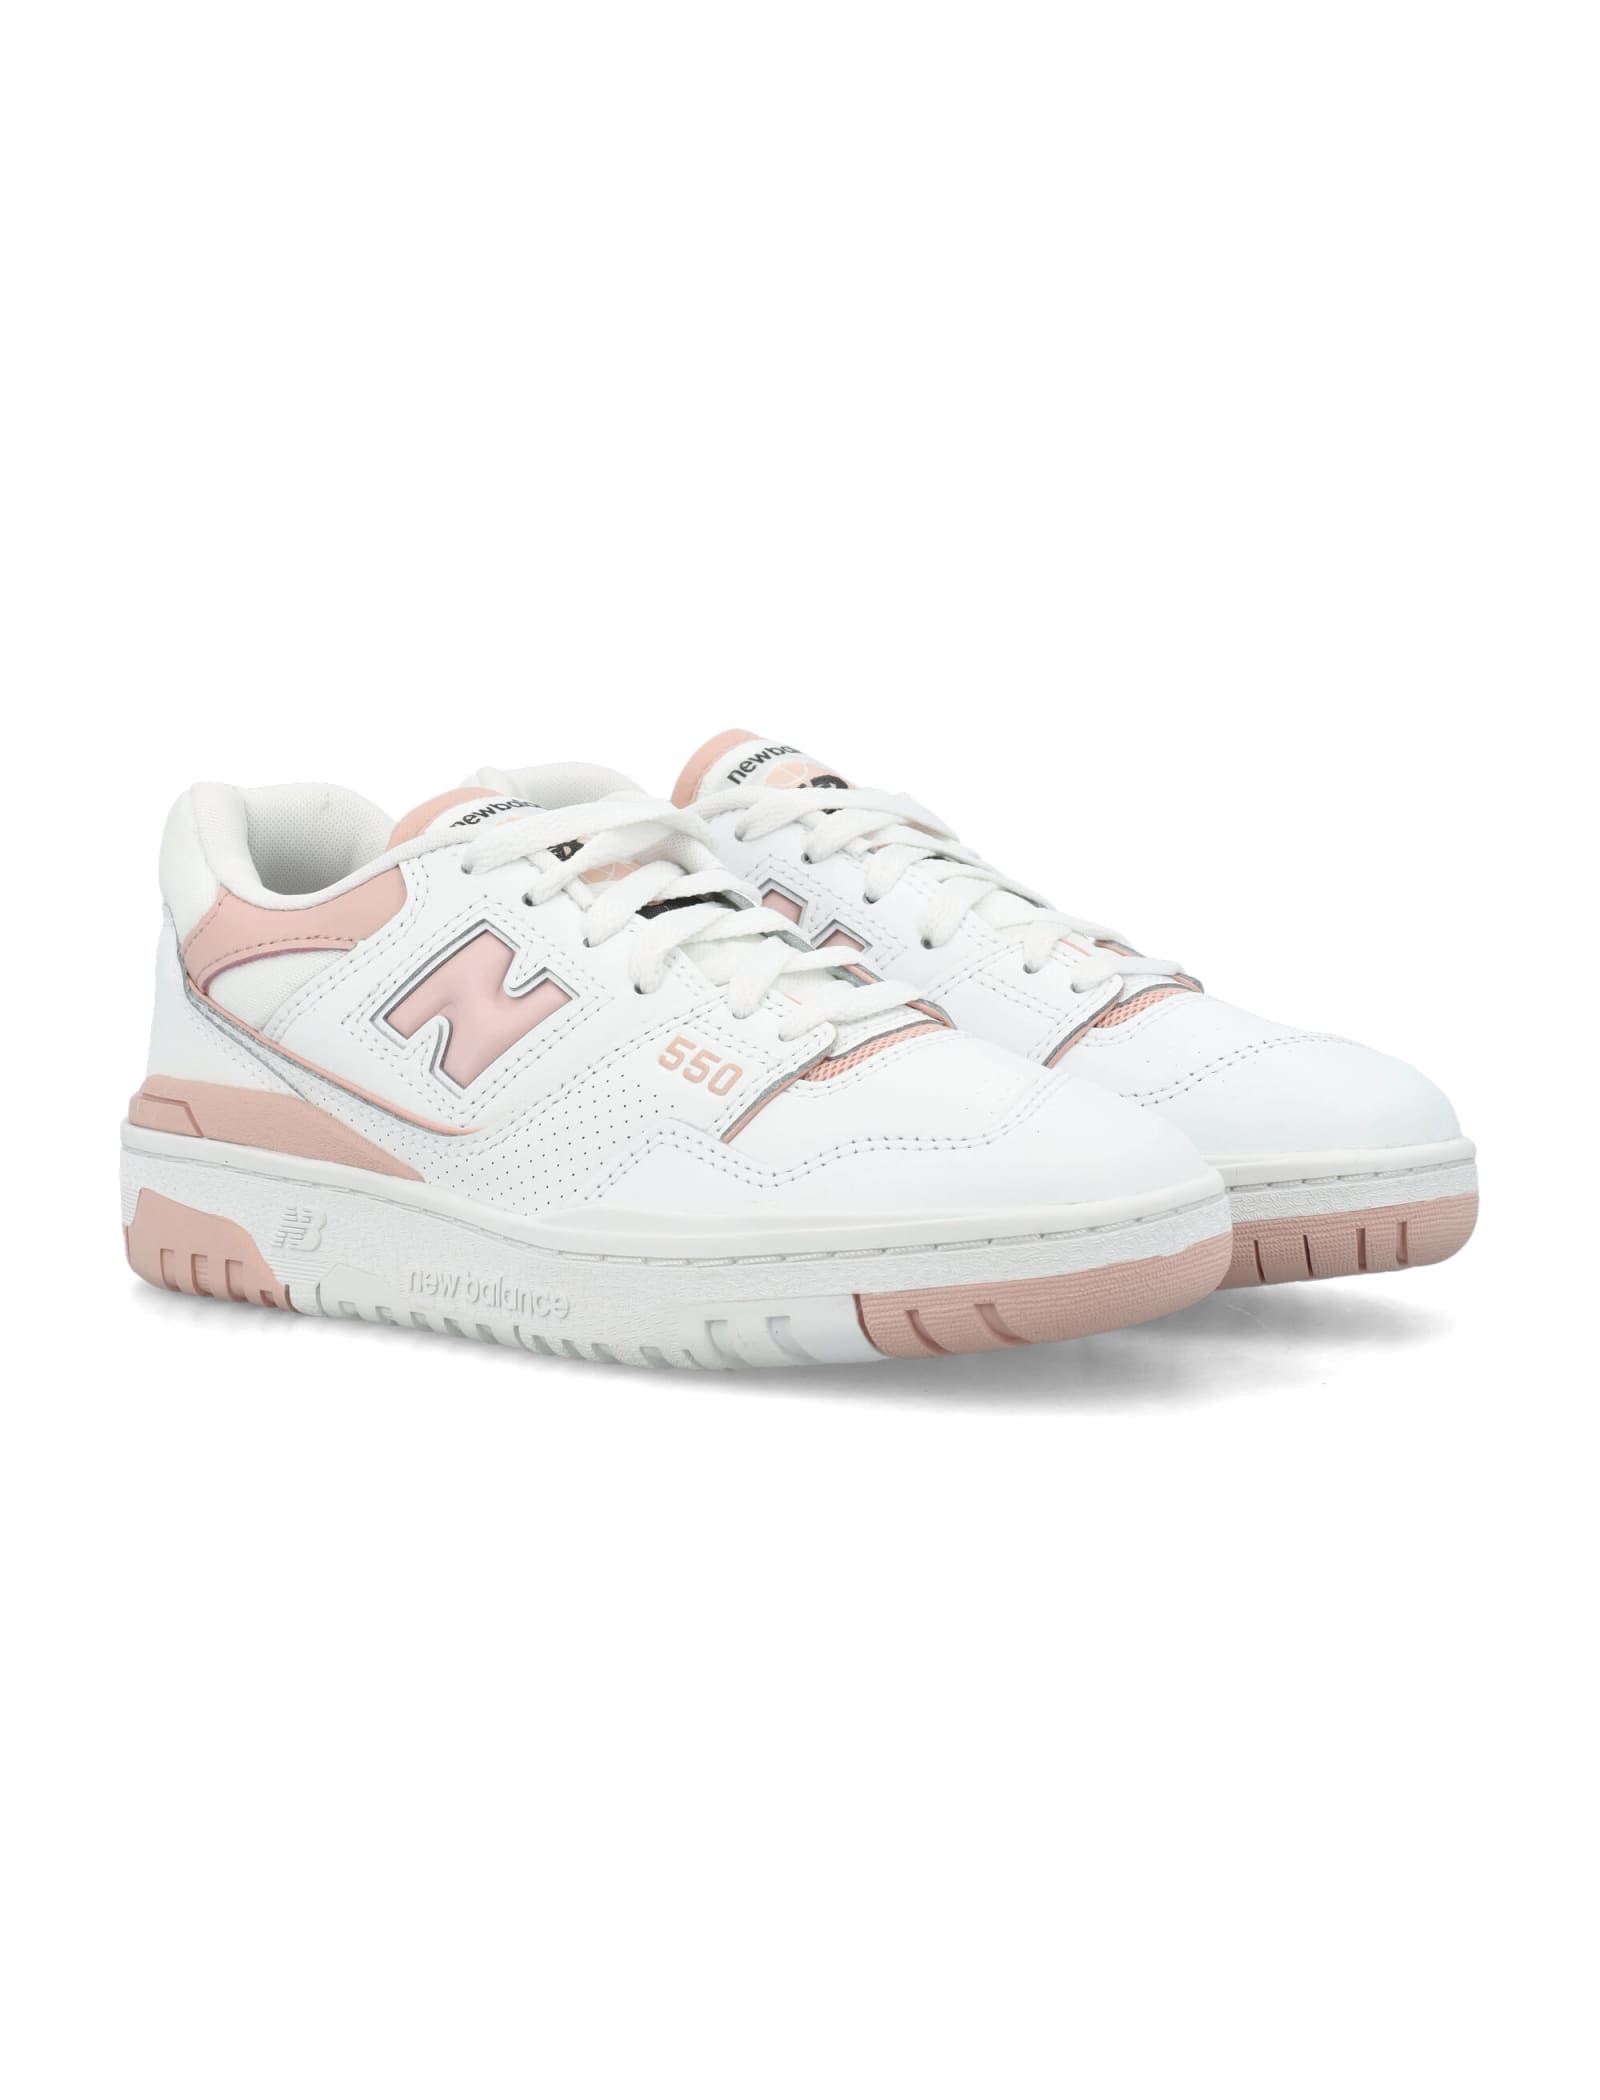 Shop New Balance 550 Womans Sneakers In White Pink